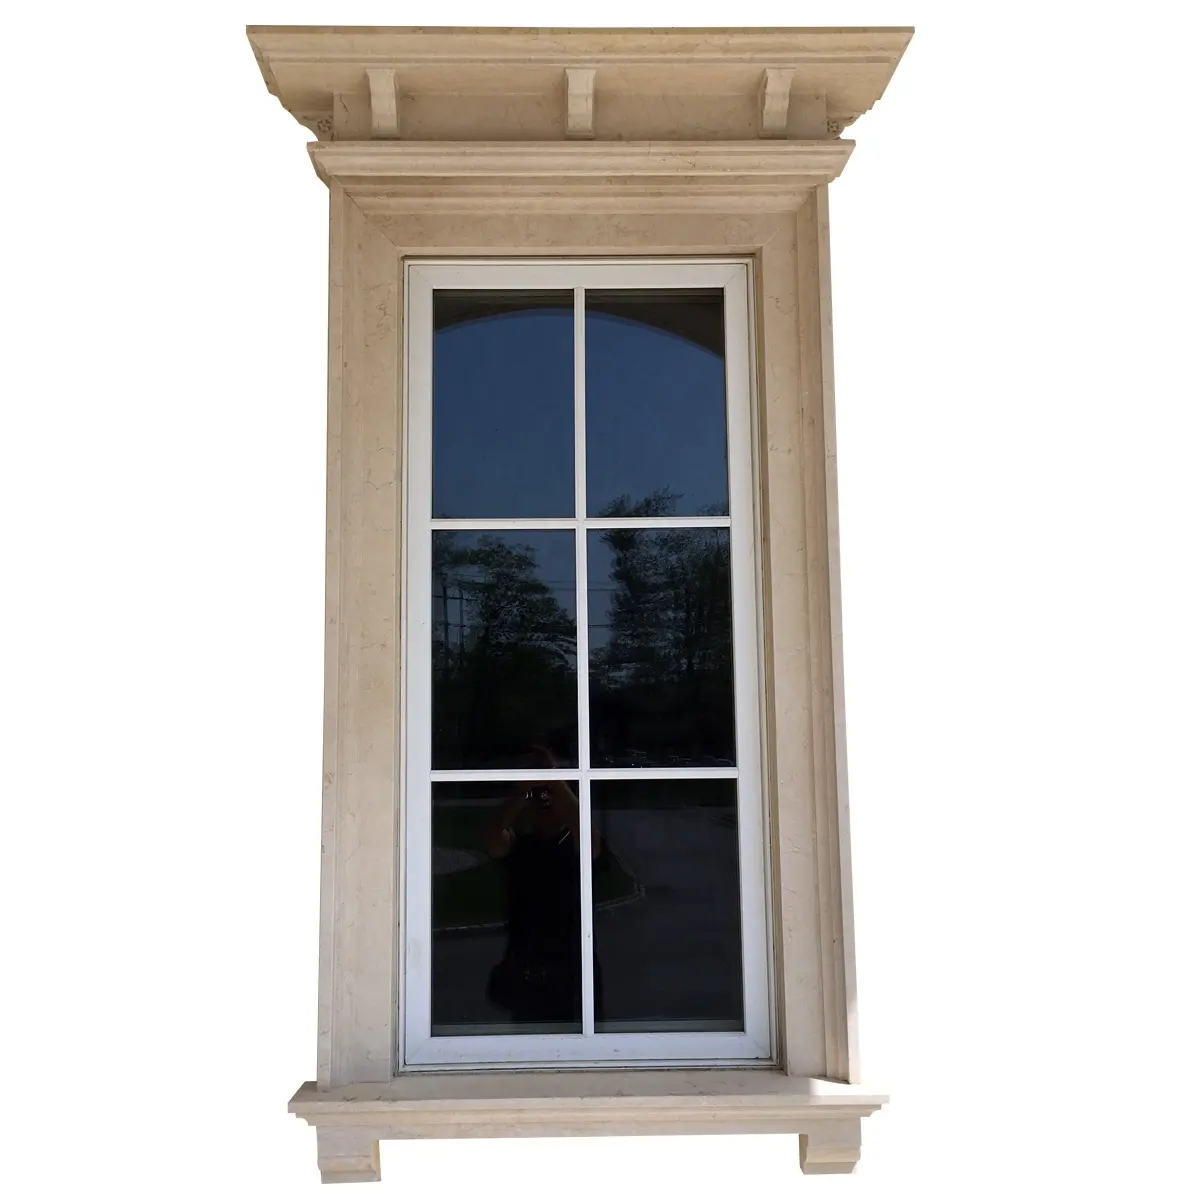 Natural stone door frame factory direct supply marble window frame design